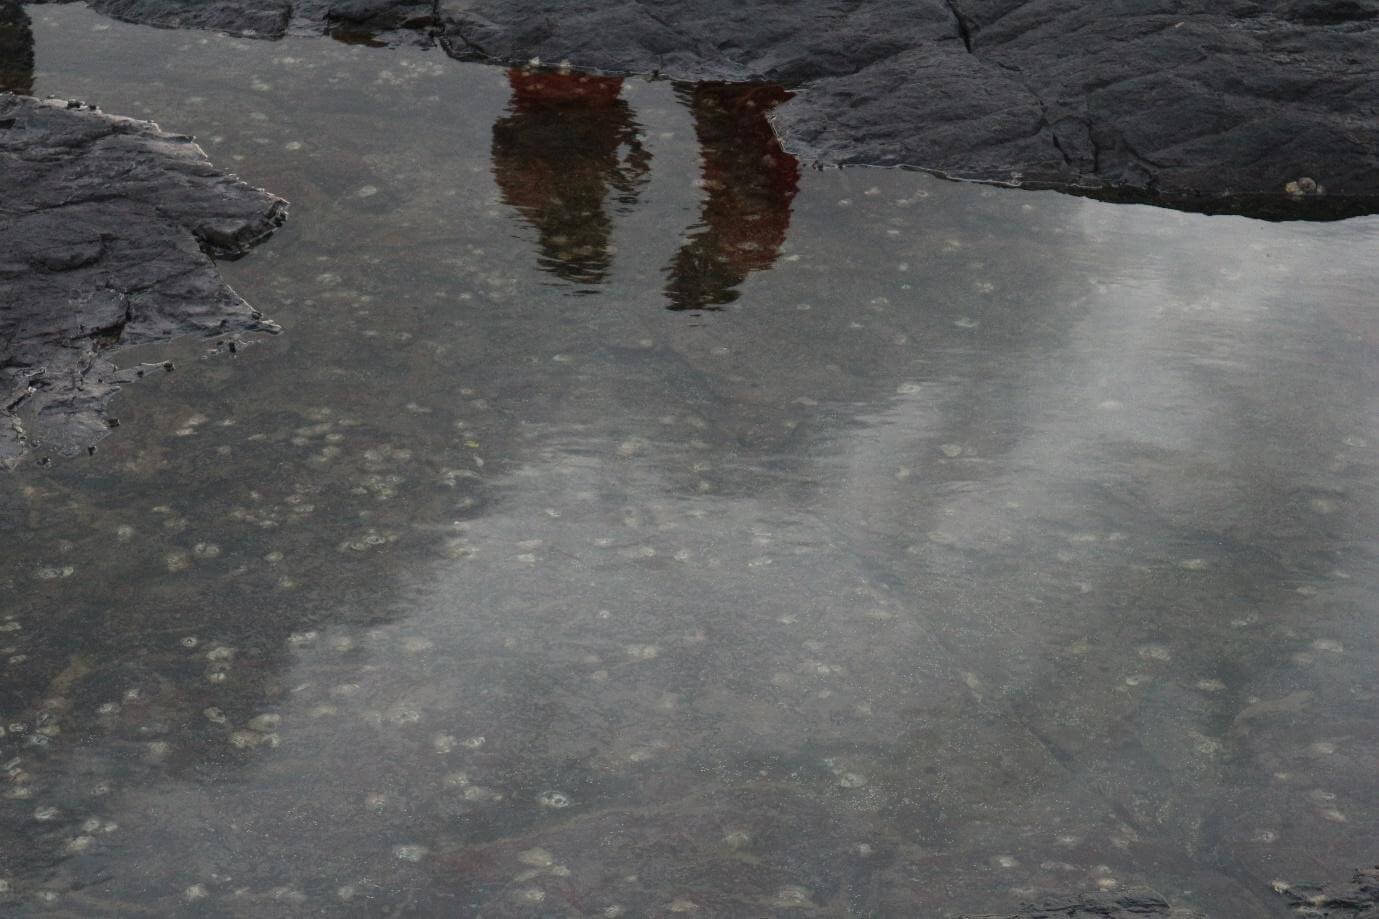 A man and a woman standing next to each other are reflected in a pool of water gathered in the rocks.